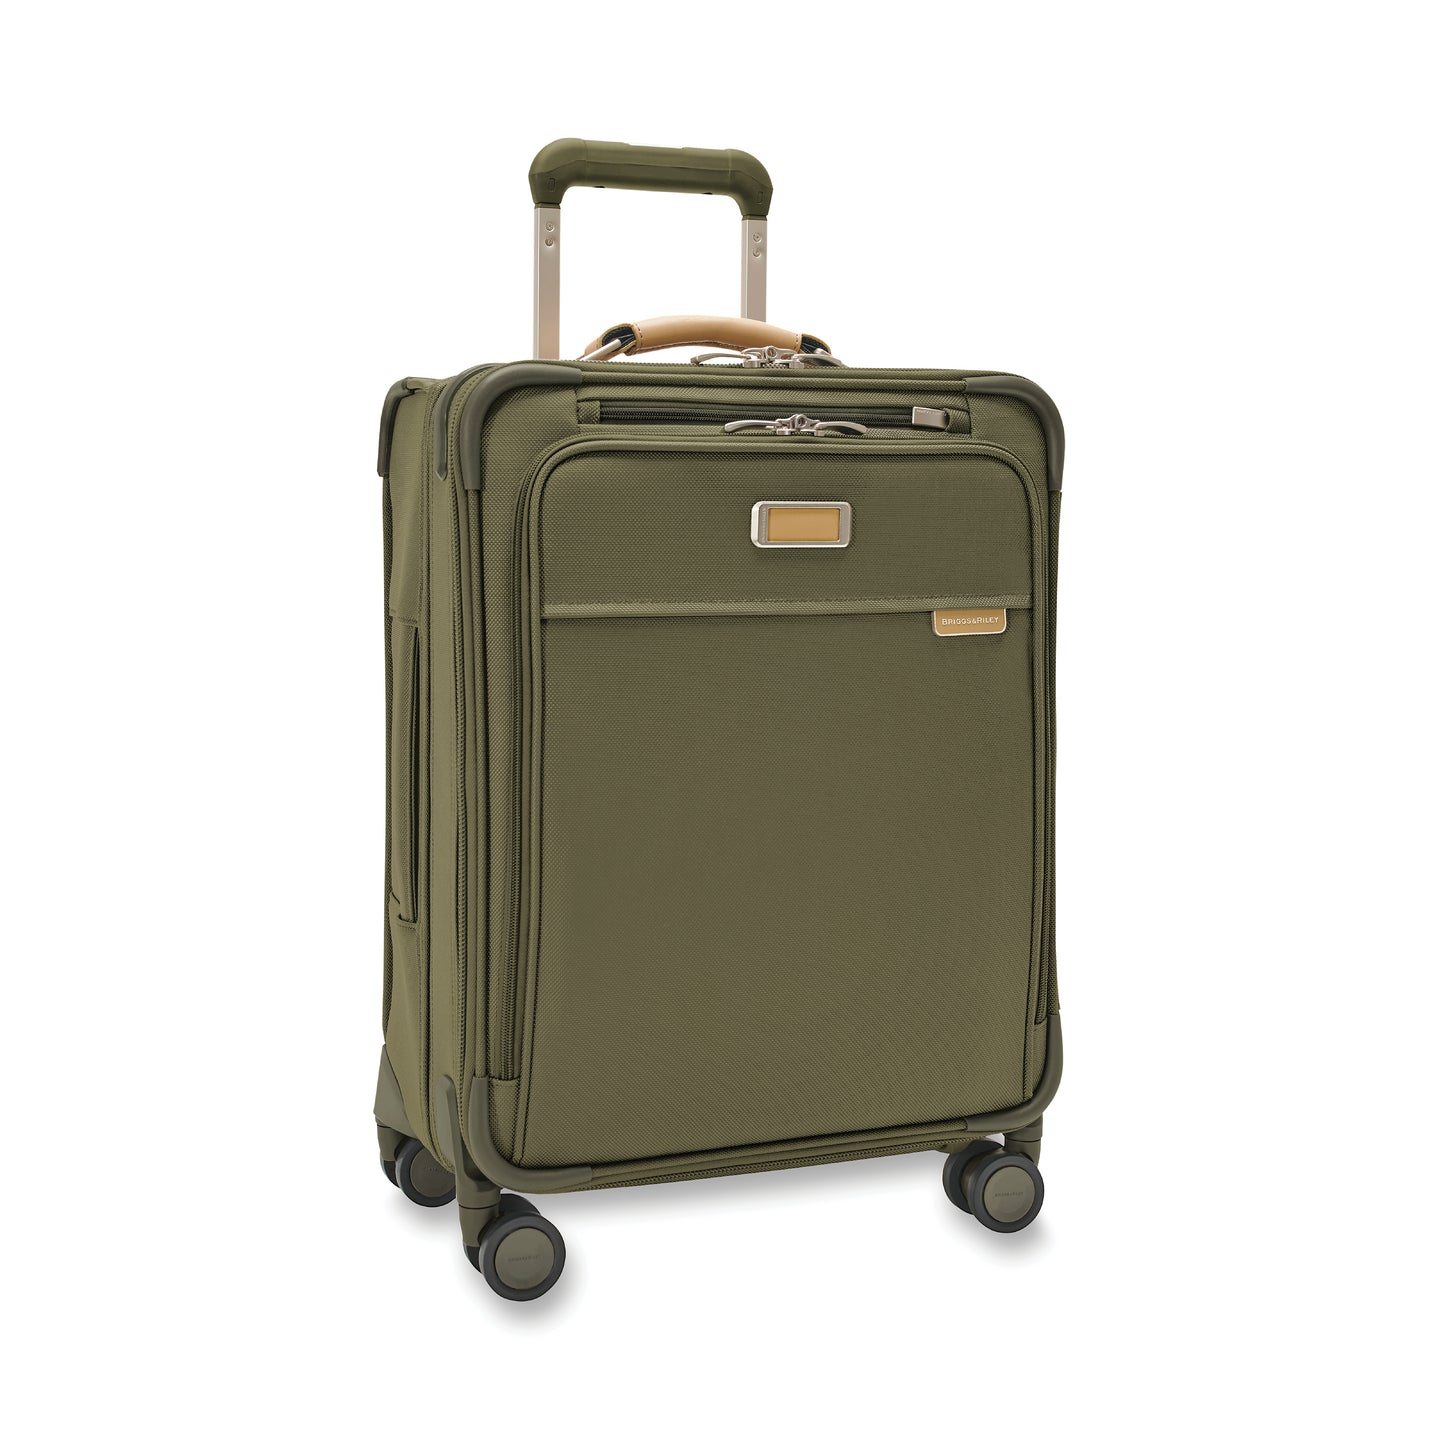 Briggs & Riley Baseline Softside Global Carry-On Spinner with Suiter